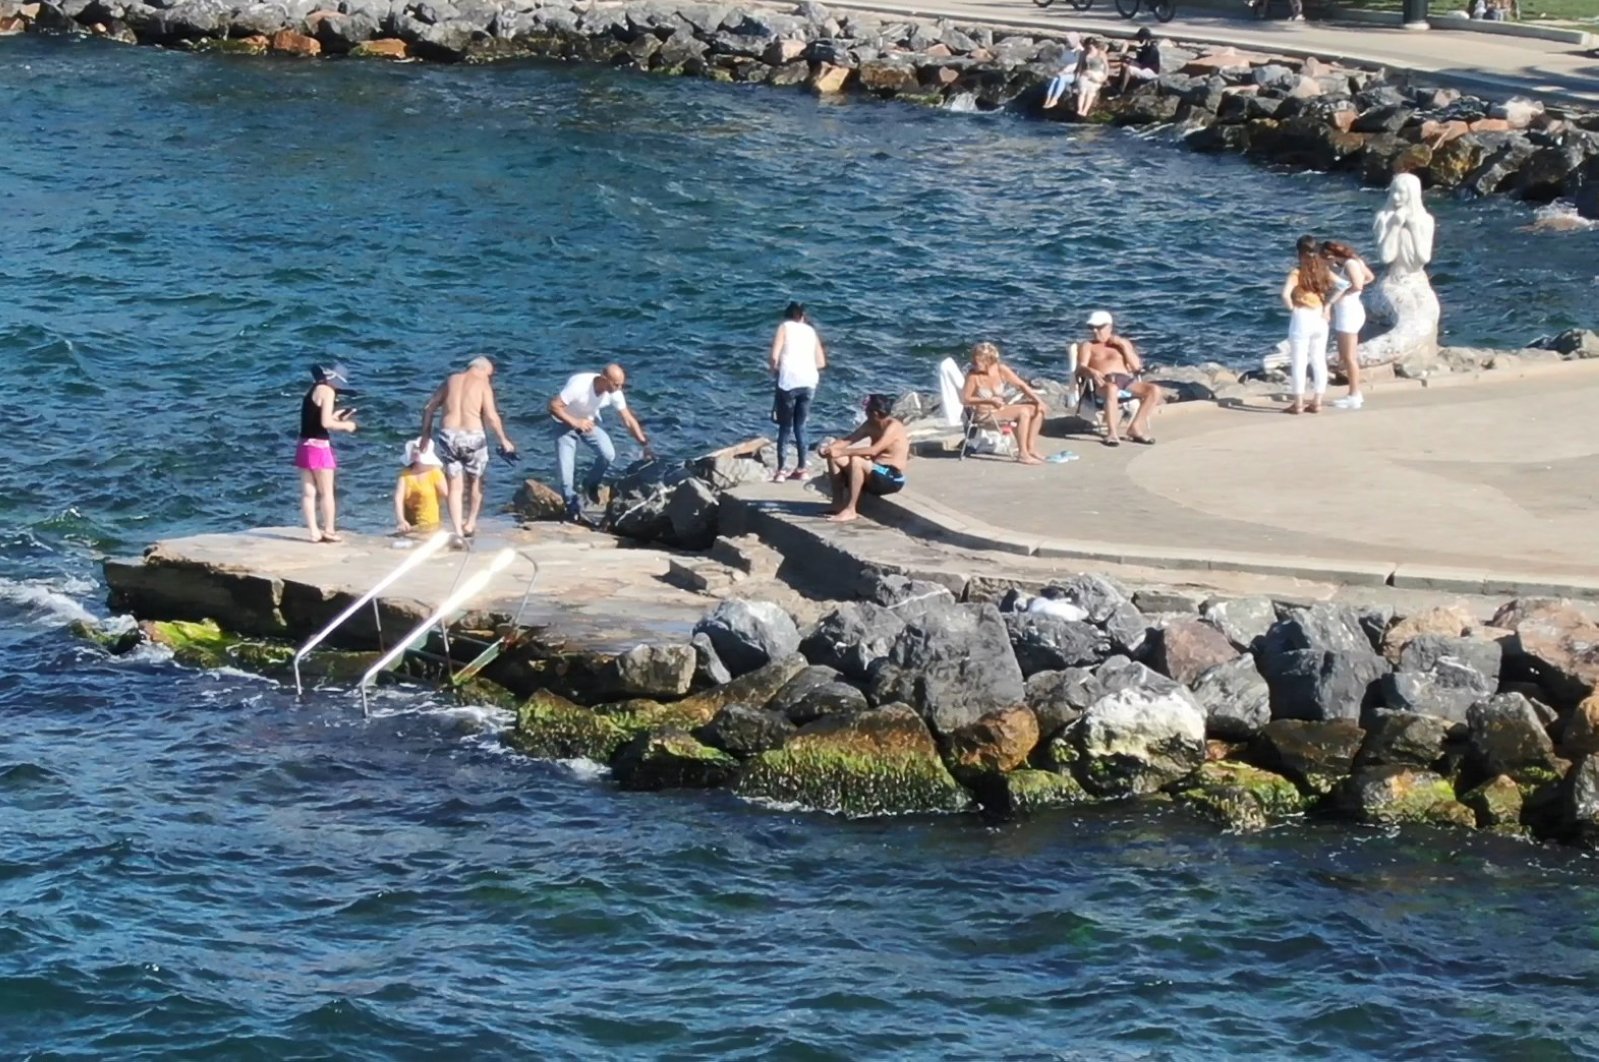 Locals who do not want to pay for private beaches swim off rocky shores in Büyükada, Istanbul, Aug. 3, 2020. (DHA Photo)